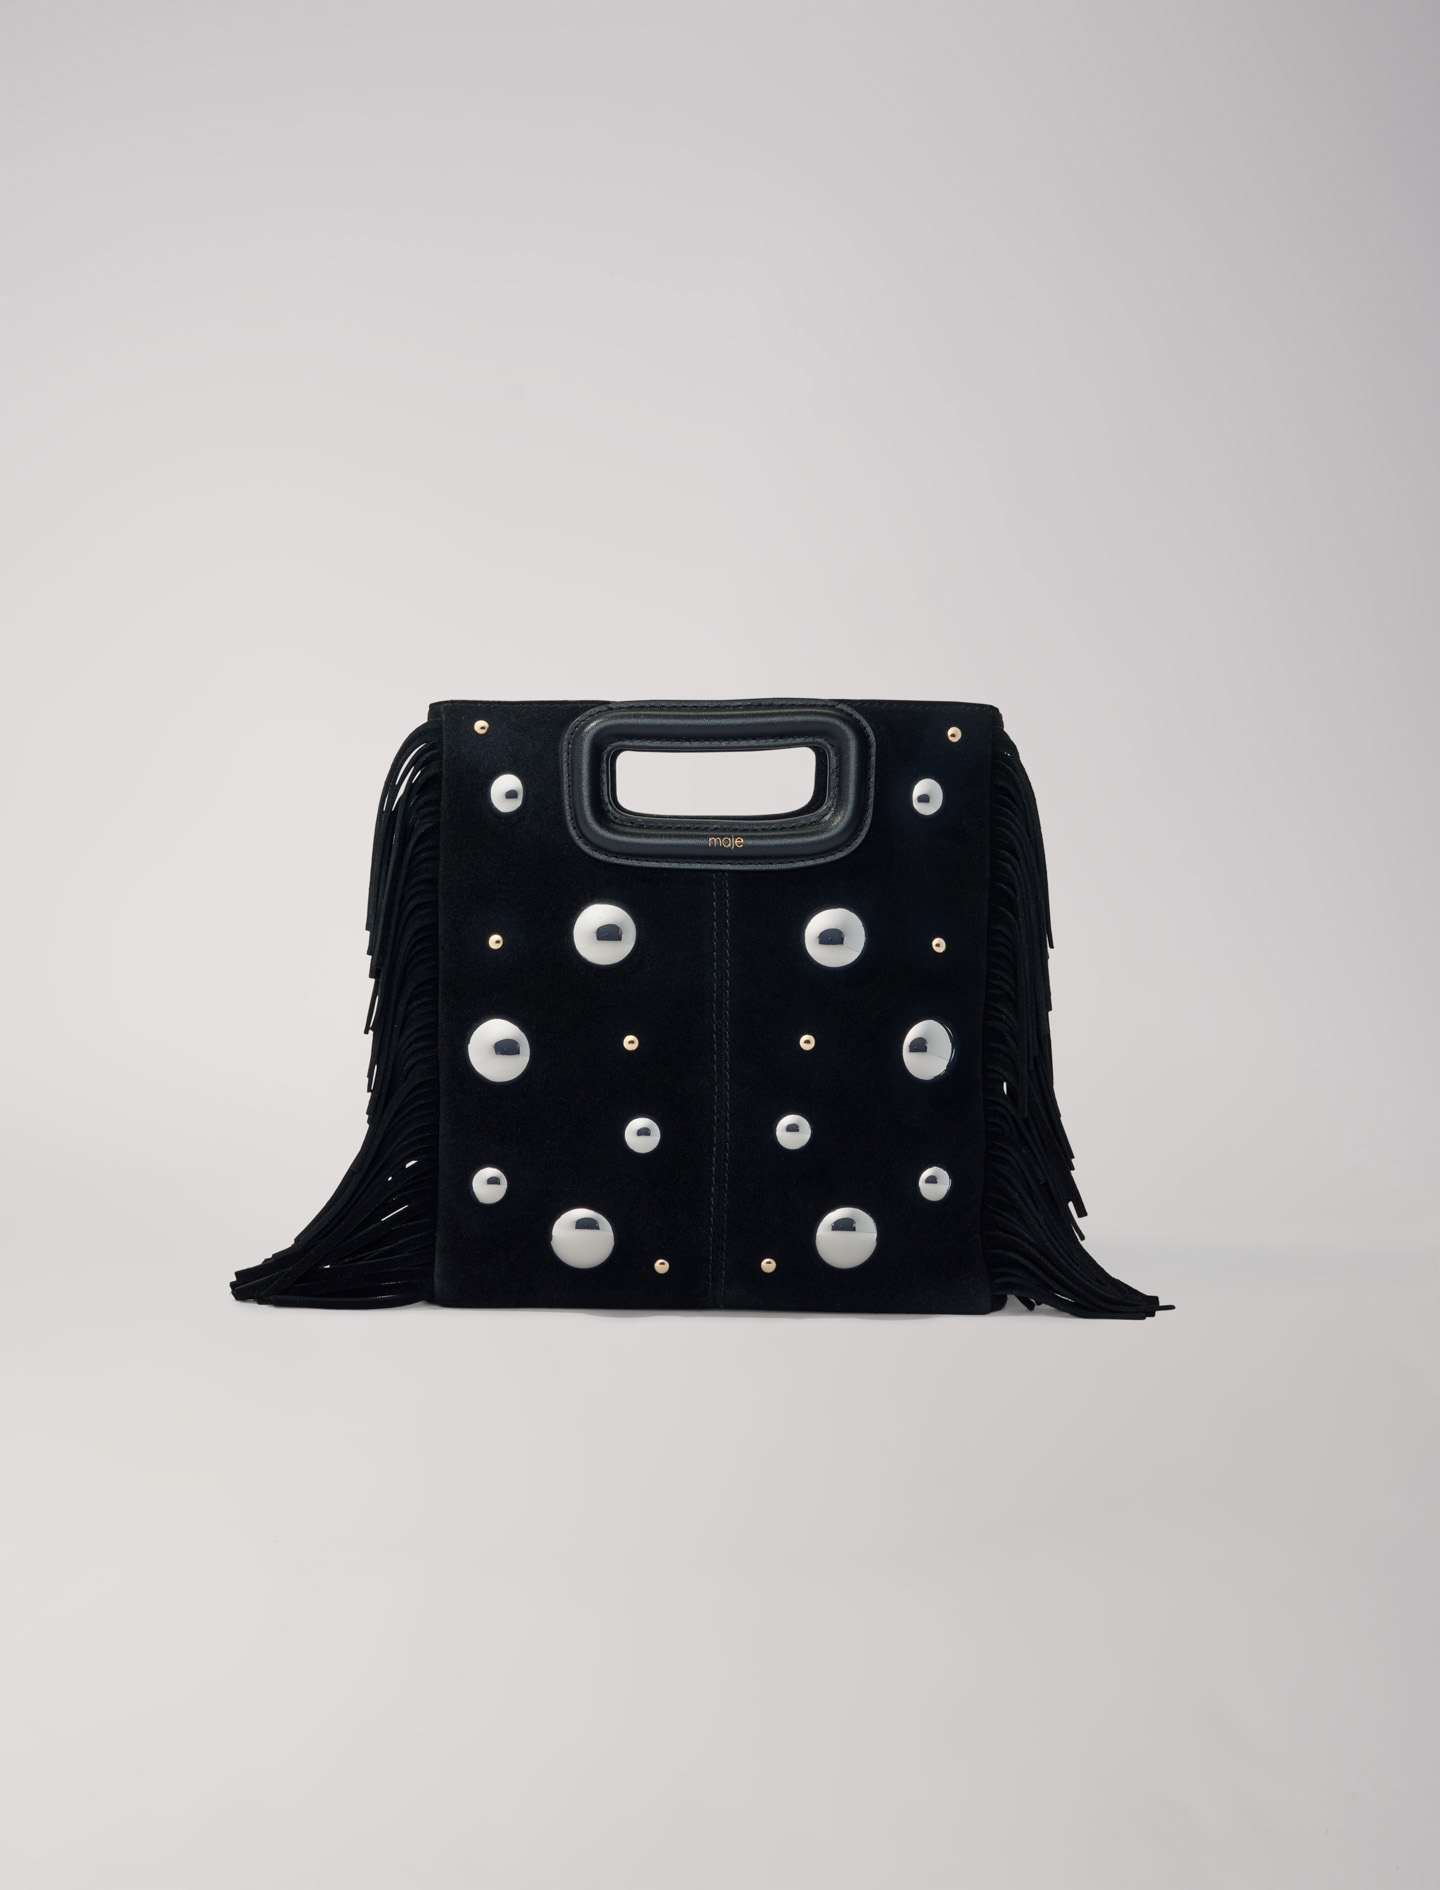 Mixte's polyester Rivet: M suede bag with studs for Spring/Summer, size Mixte-All Bags-OS (ONE SIZE), in color Black / Black